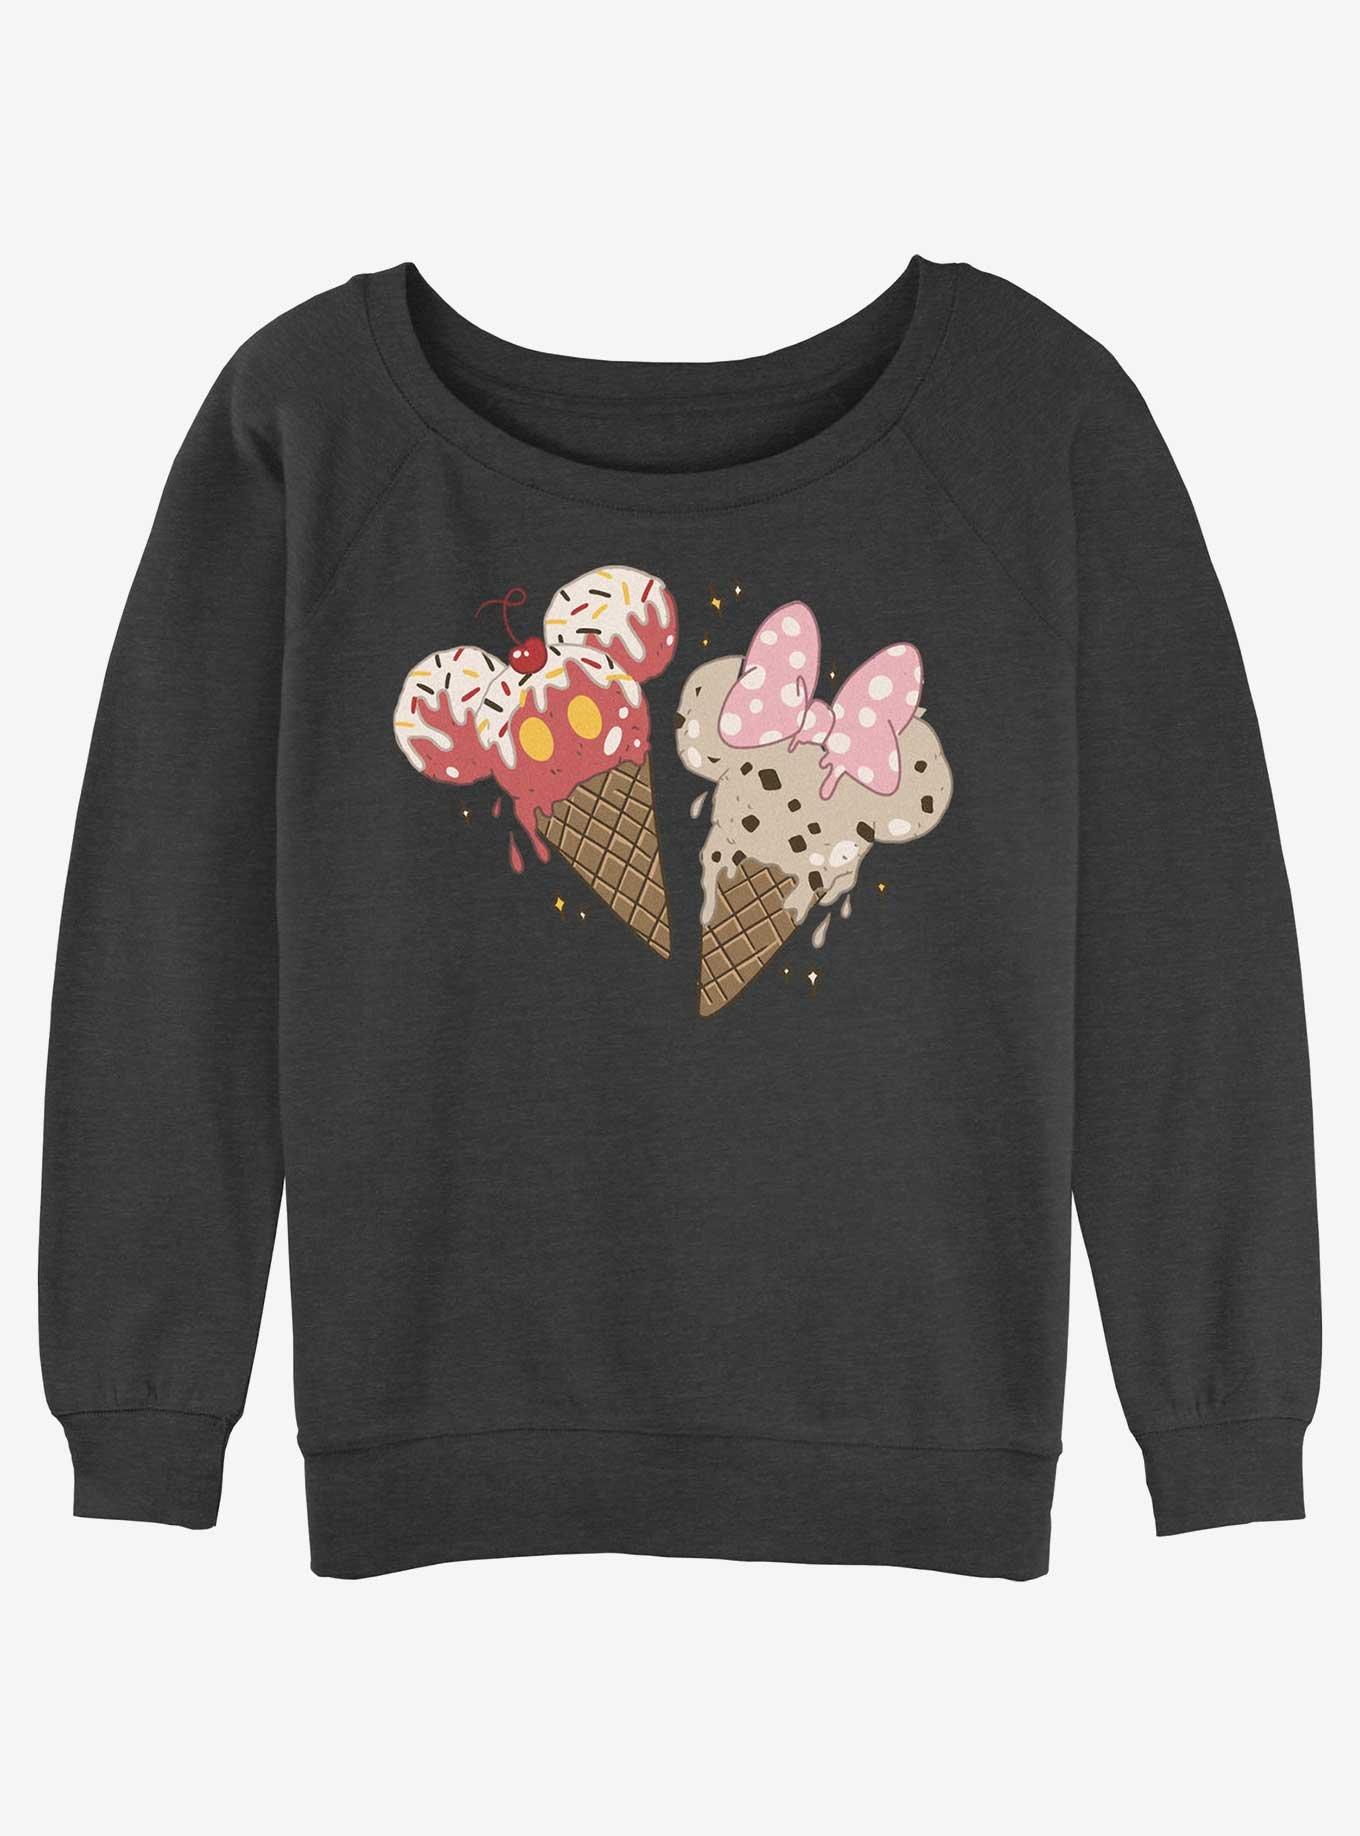 Disney Mickey Mouse & Minnie Mouse Ice Cream Cones Girls Slouchy Sweatshirt, CHAR HTR, hi-res